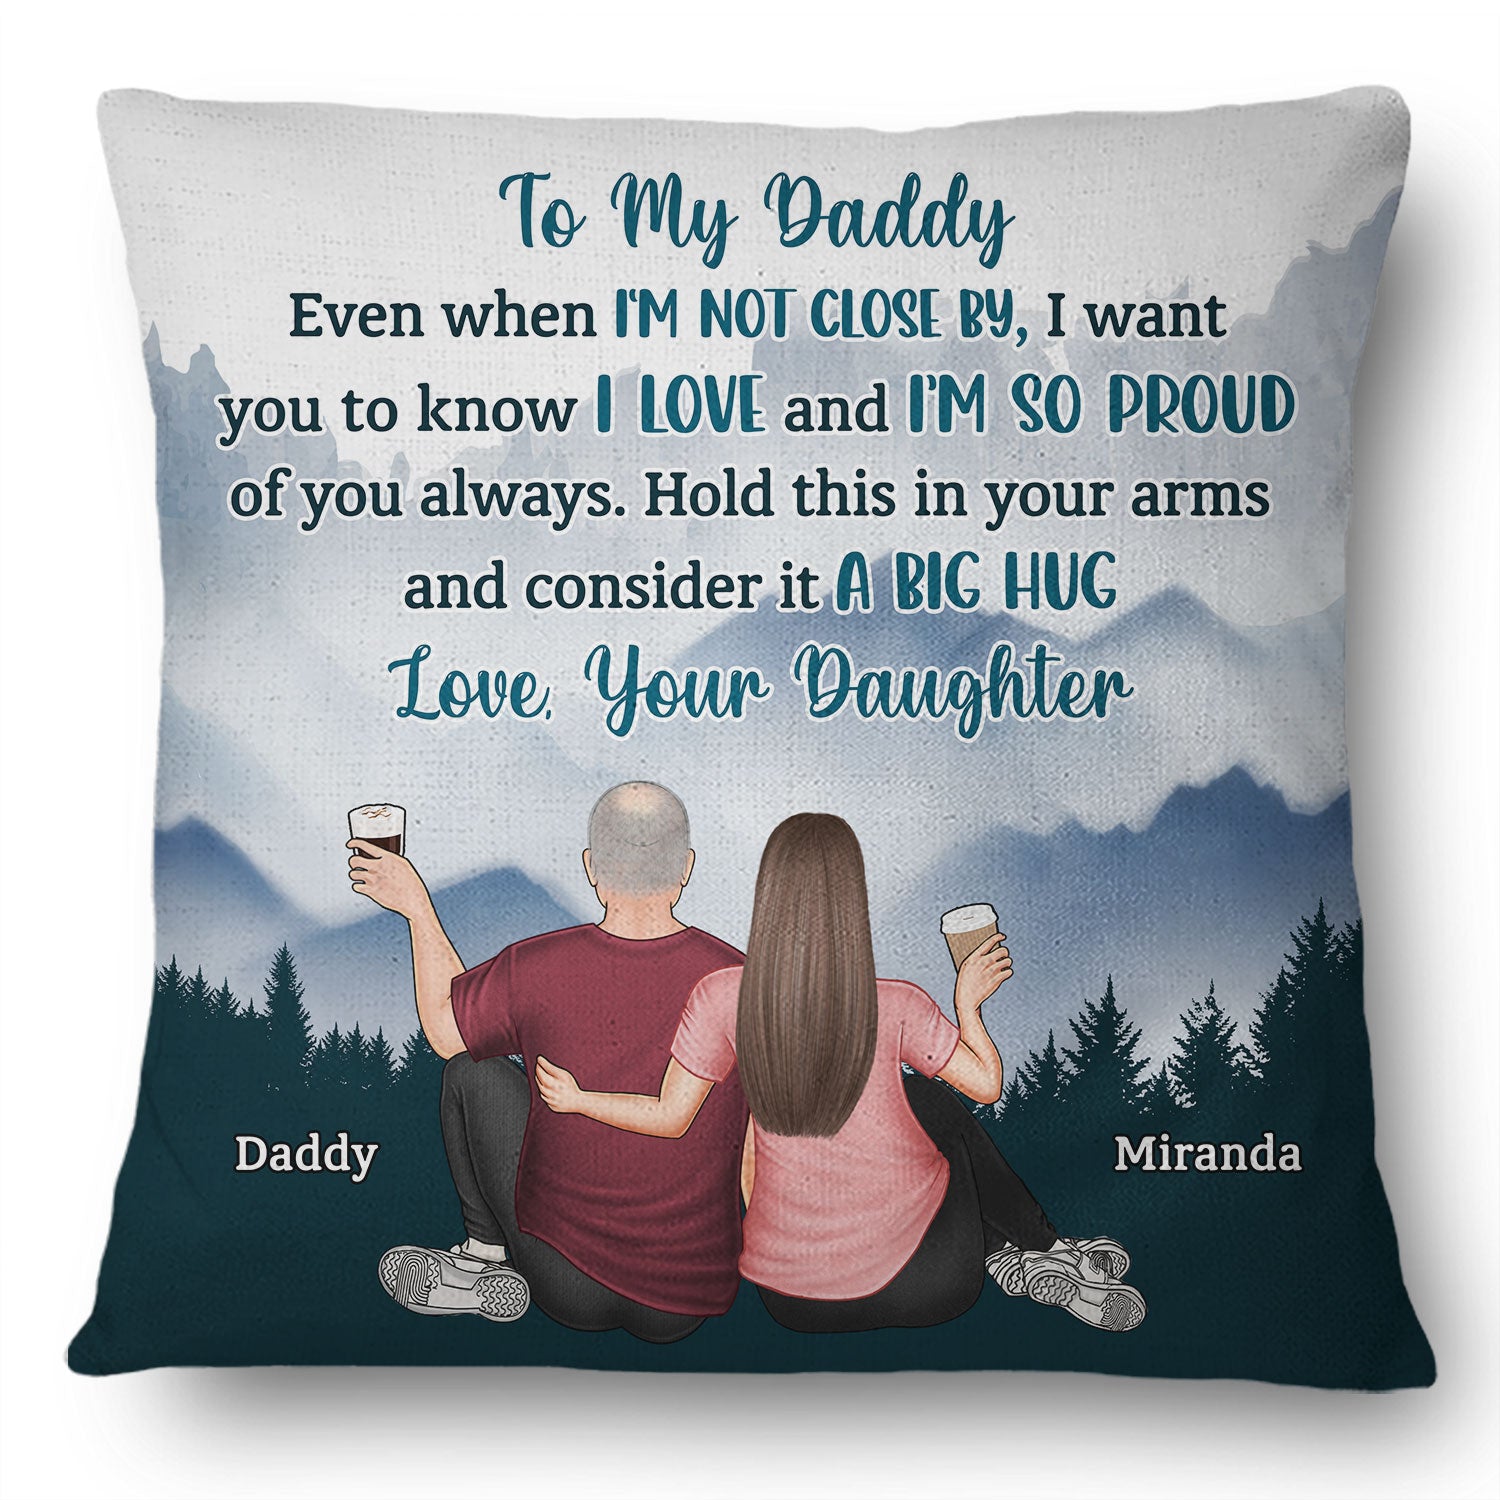 Hold It In Your Arms And Consider It A Big Hug - Birthday, Loving Gift For Dad, Father, Grandpa, Parents, Family - Personalized Custom Pillow